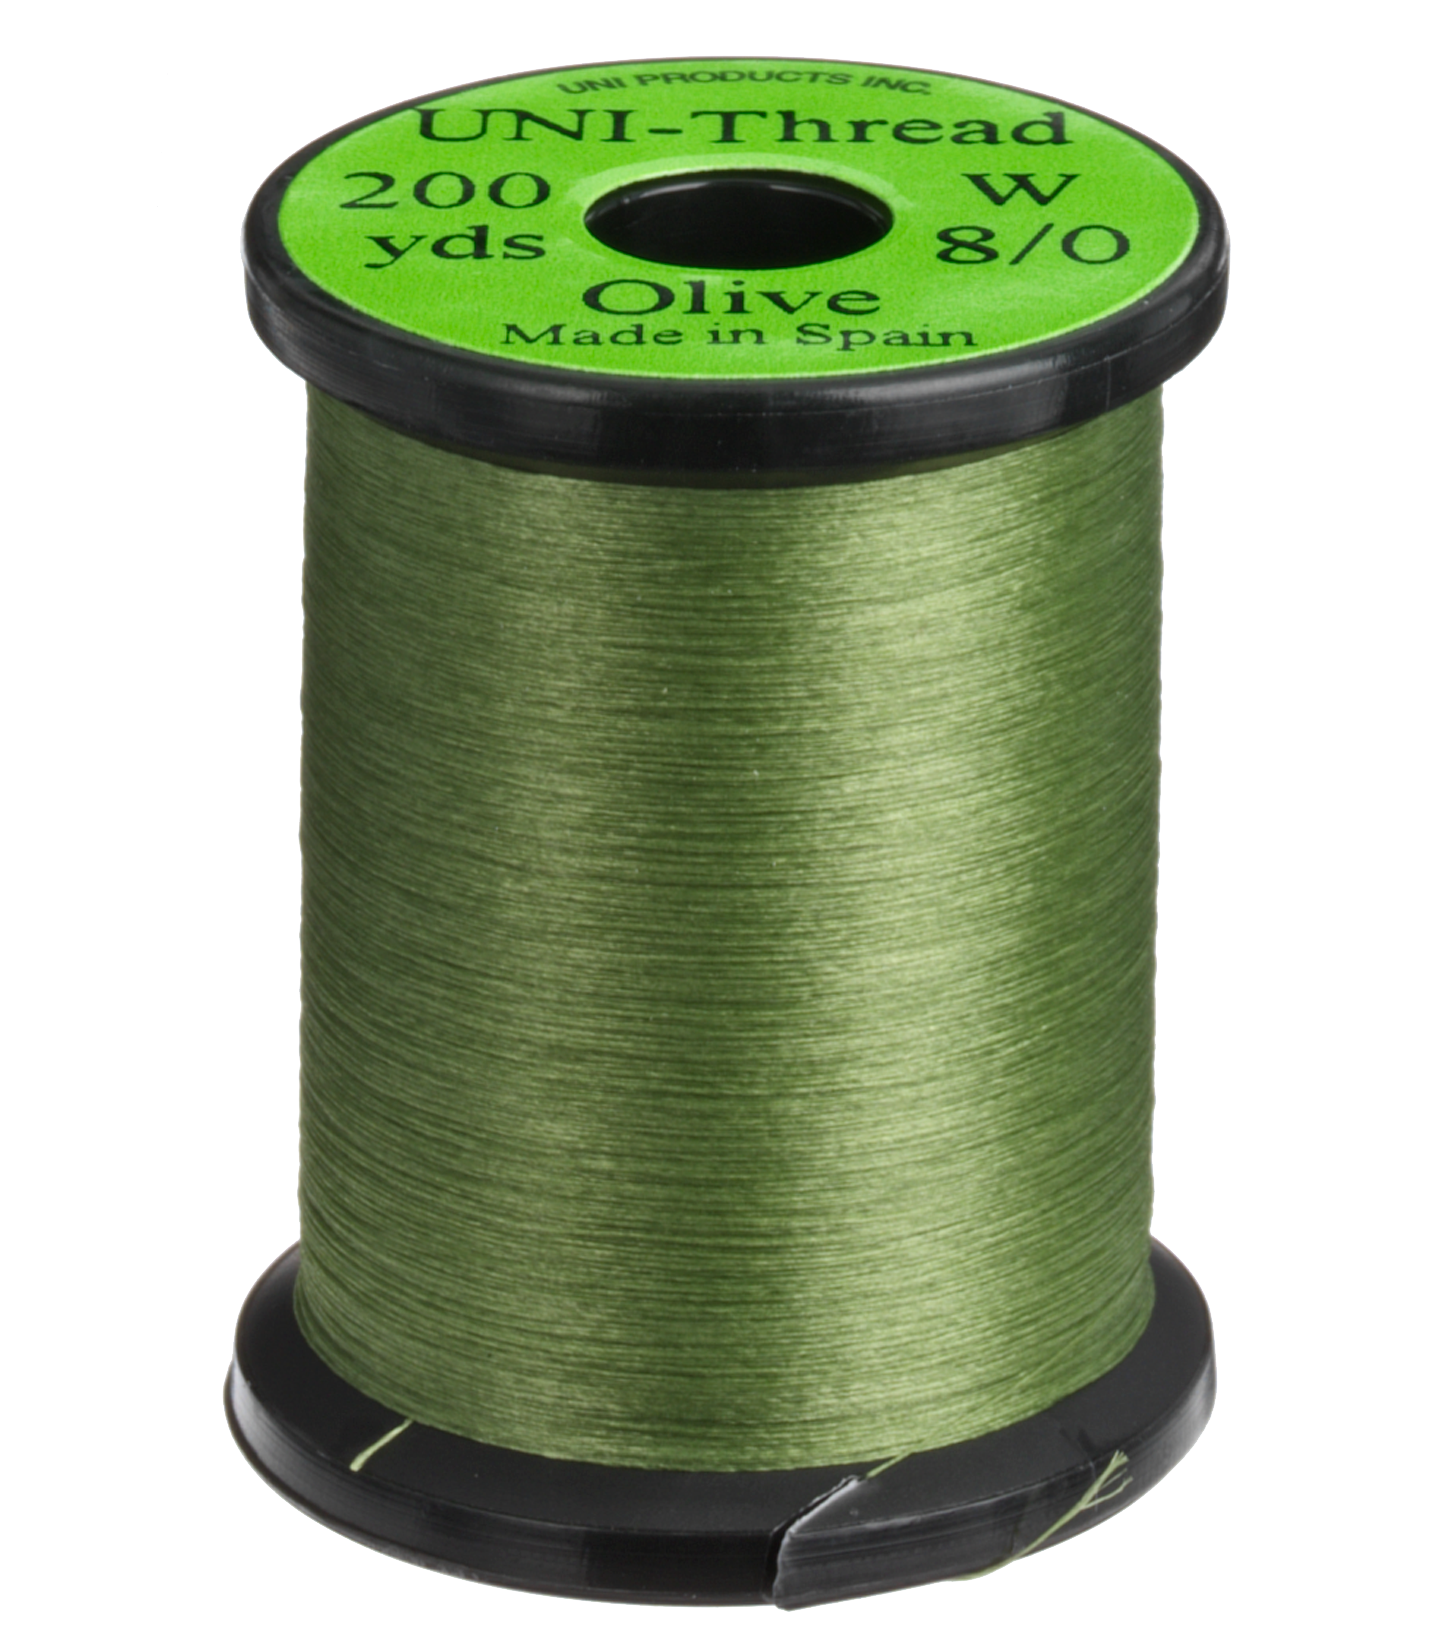 Uni-Thread by Uni 8/0 Fly Tying Material - Olive - 200 yards